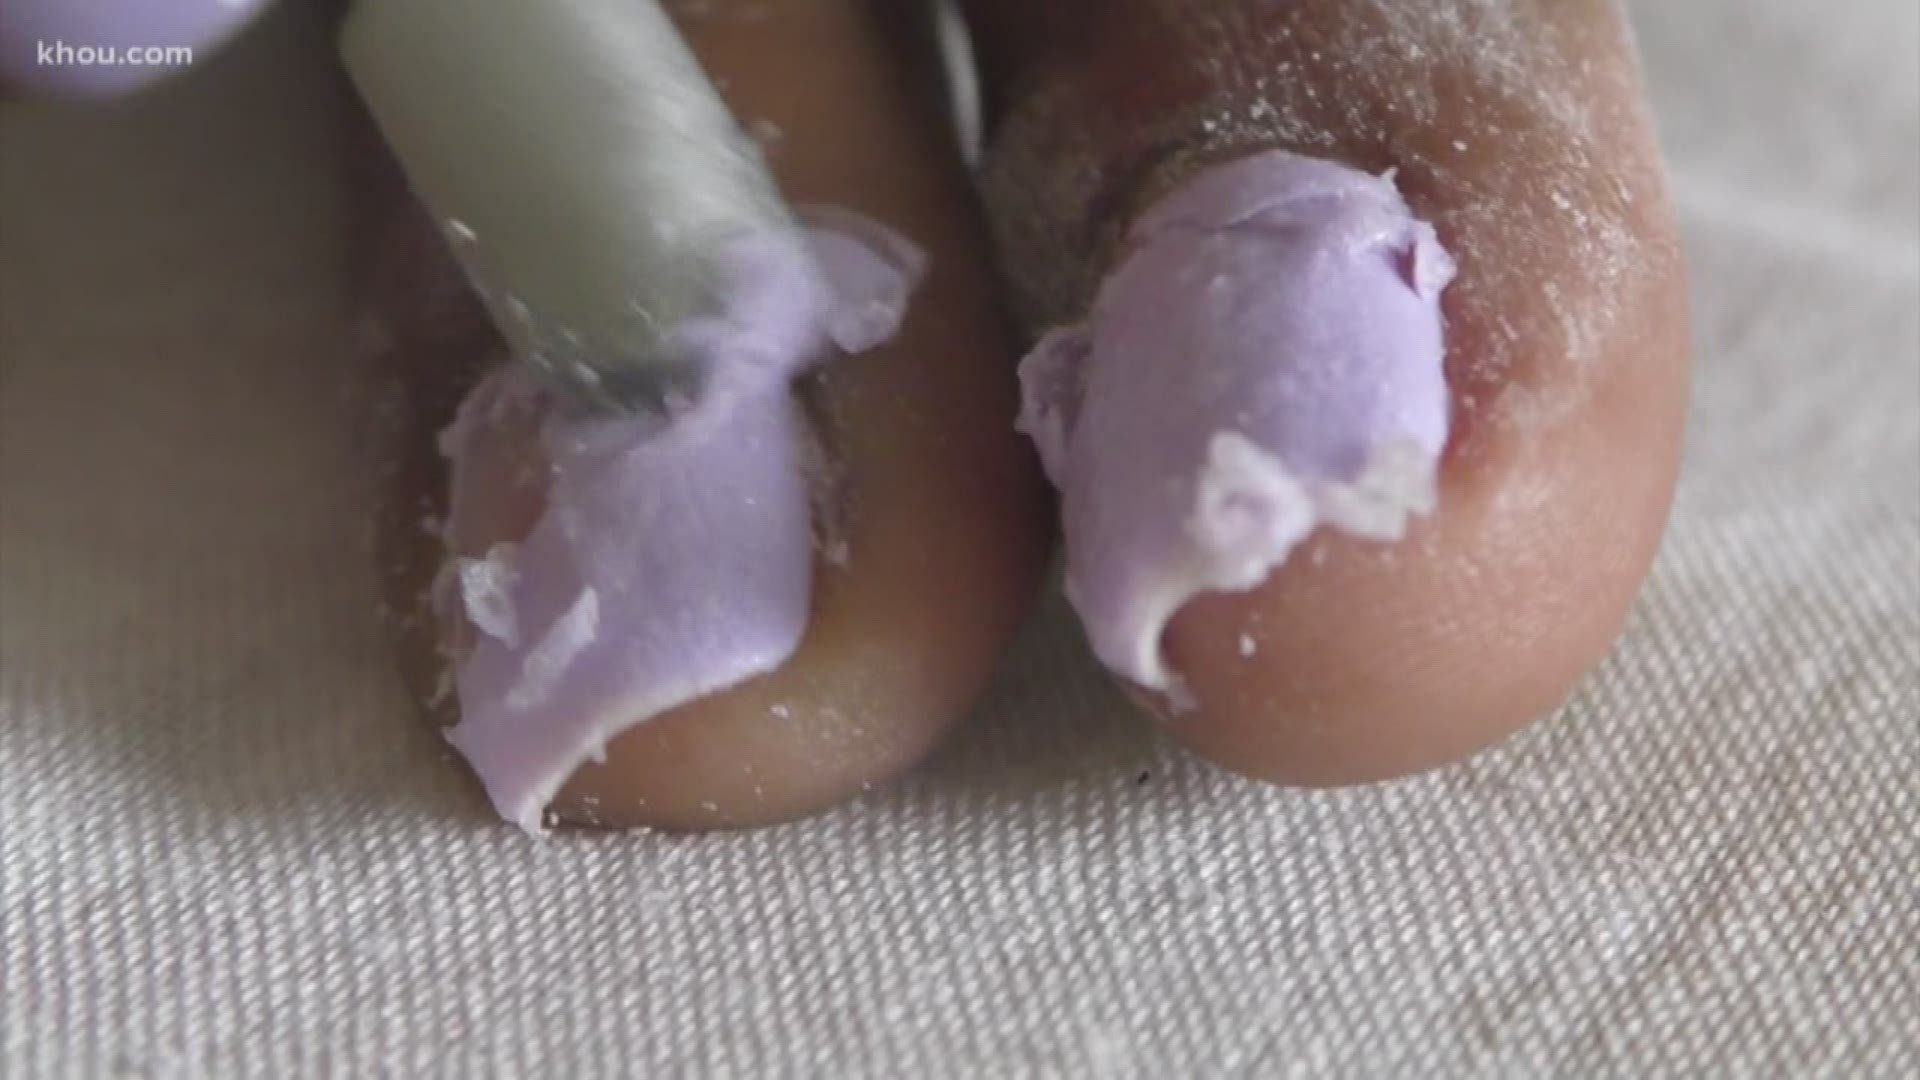 The social video for Vanish Polish looks amazing. It shows manicures melting off fingernails with no foiling, scraping or sanding.